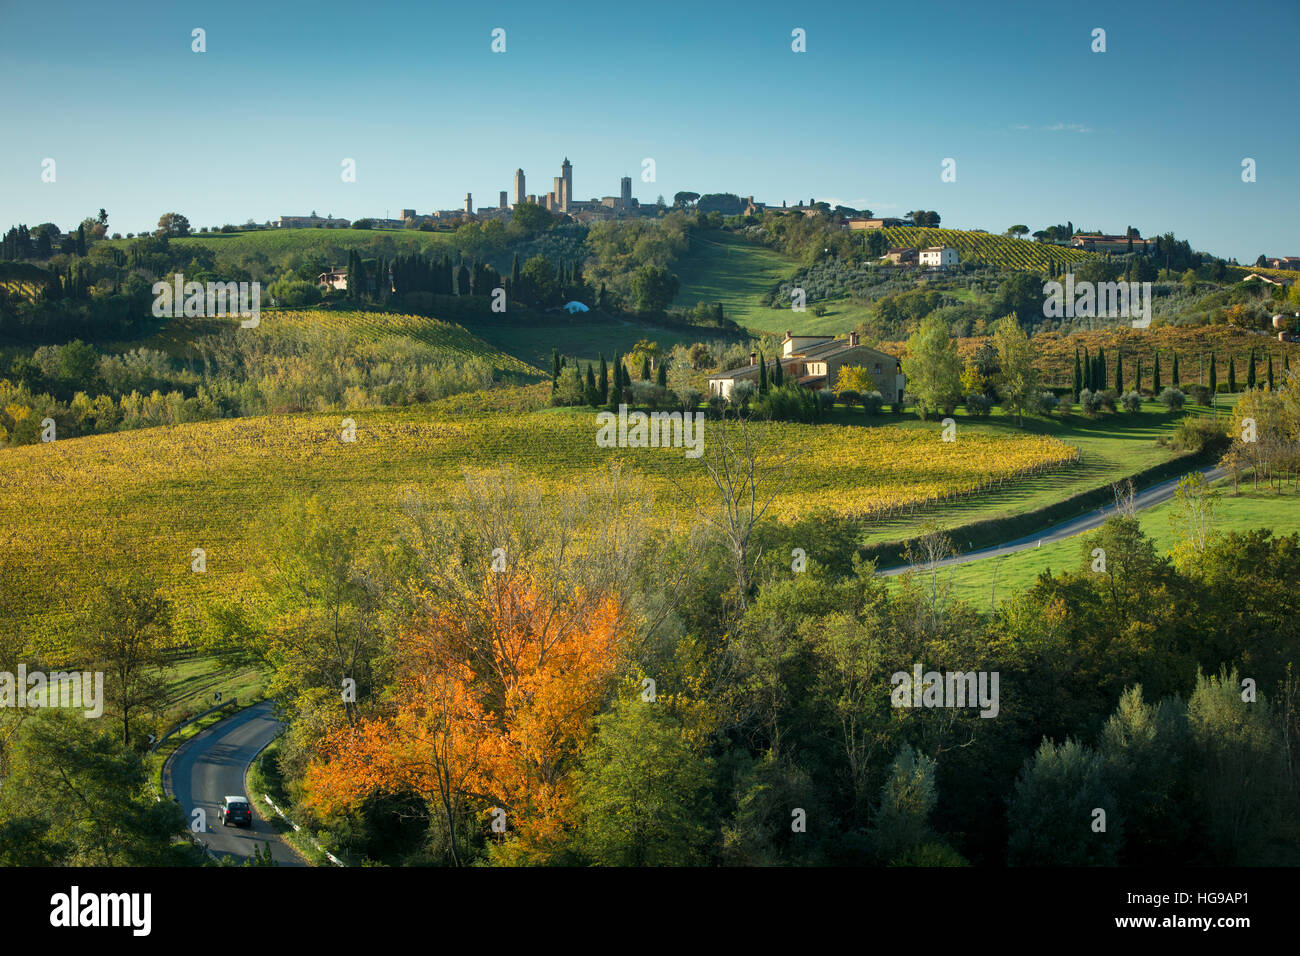 Autumn view of Tuscan countryside with medieval town of  San Gimignano beyond, Tuscany, Italy Stock Photo